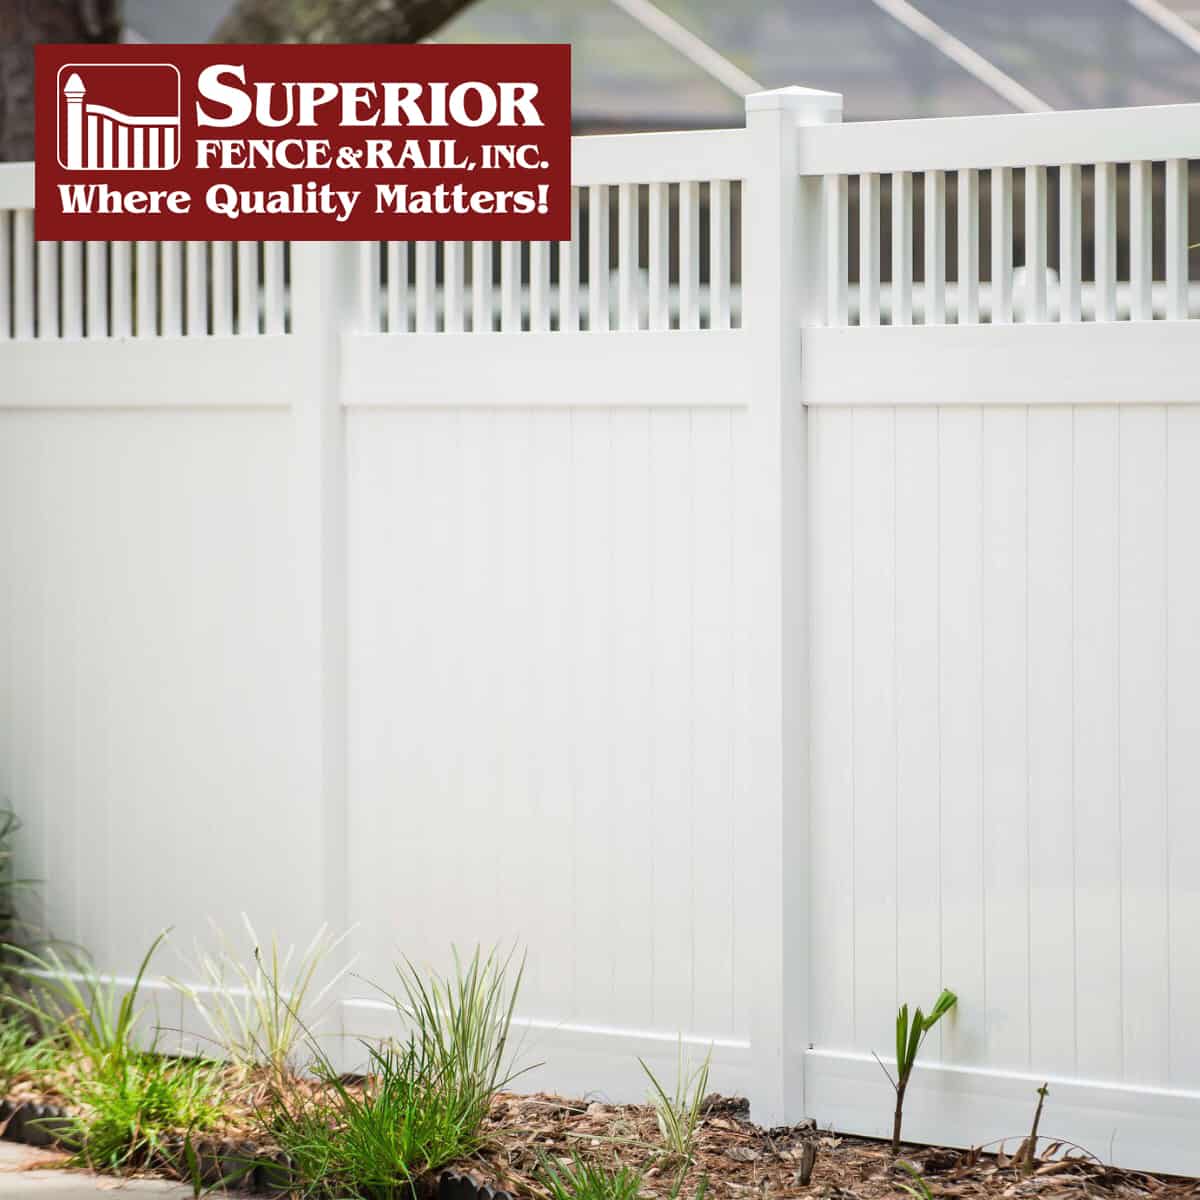 Holden Beach Fence Company Contractor